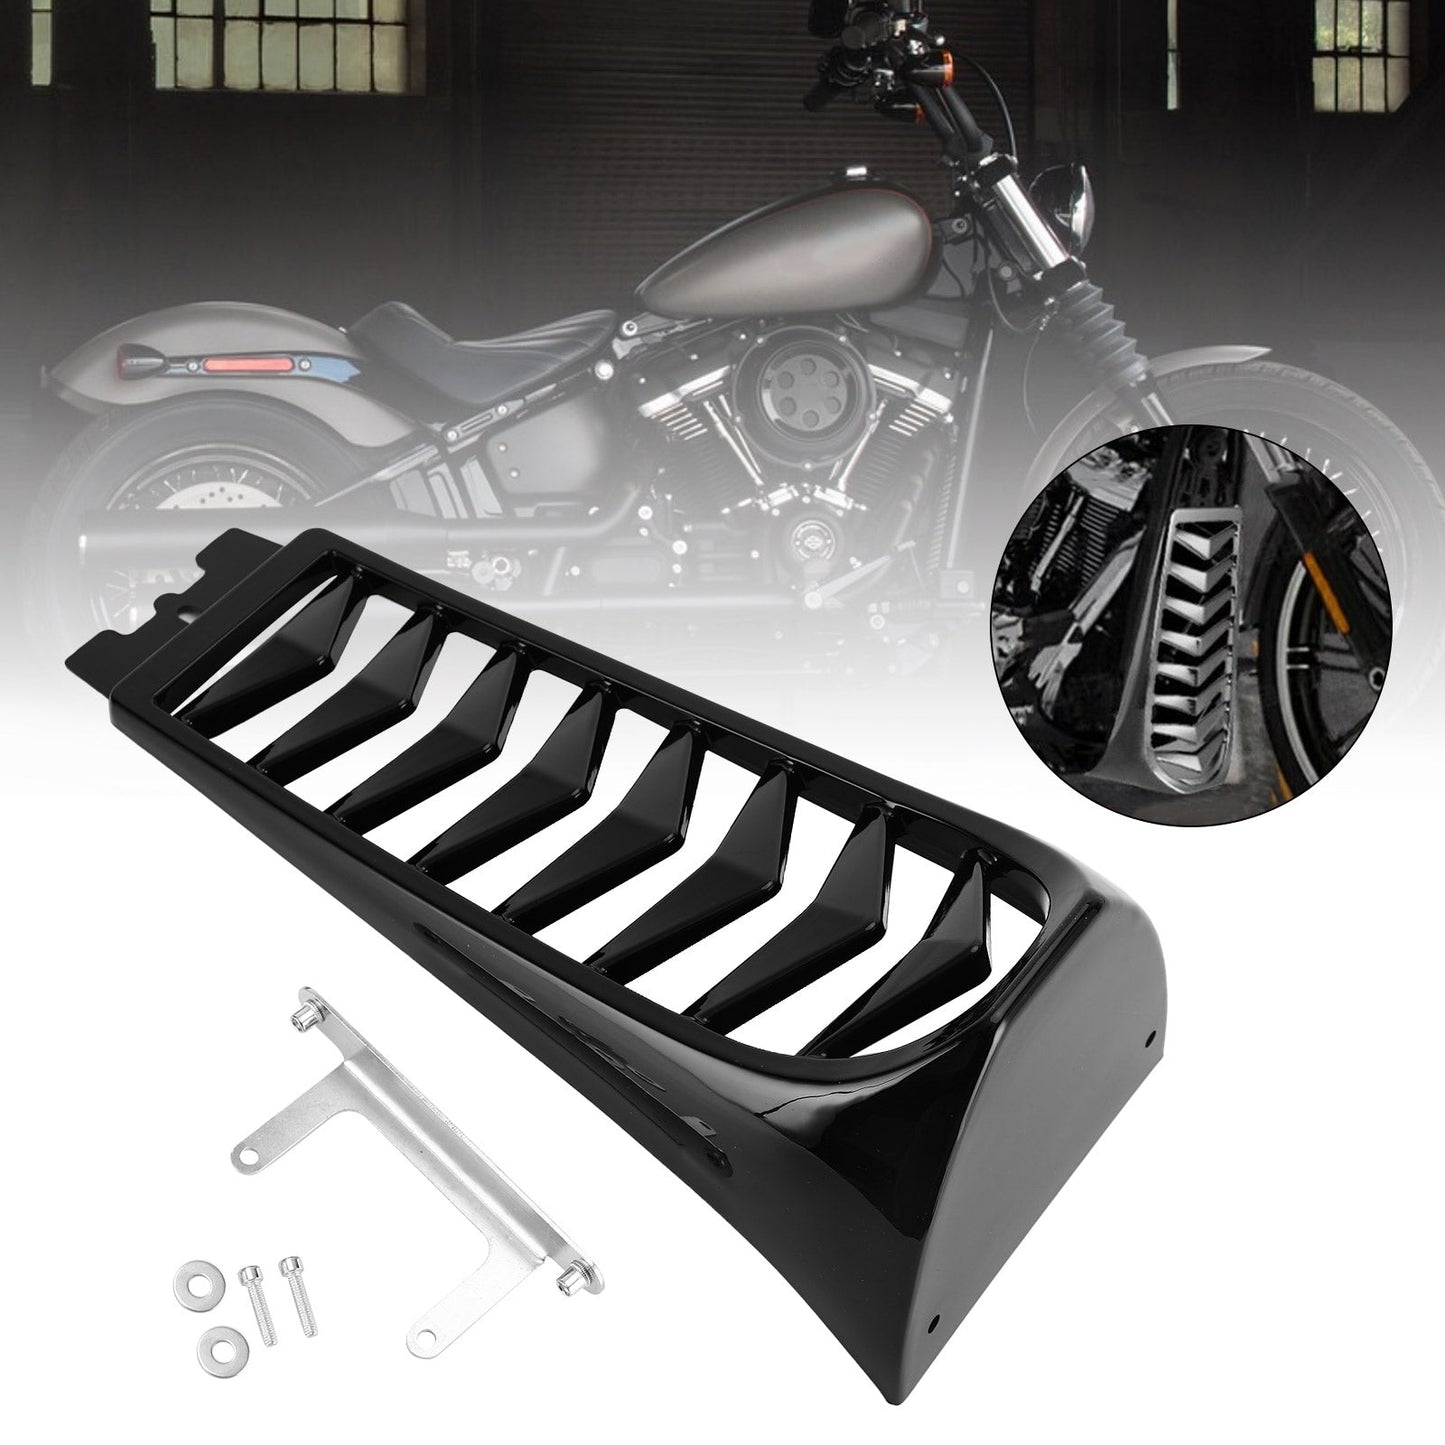 2018-2021 Softail Breakout Fat Bob Front Chin Spoiler Lower Radiator Cover